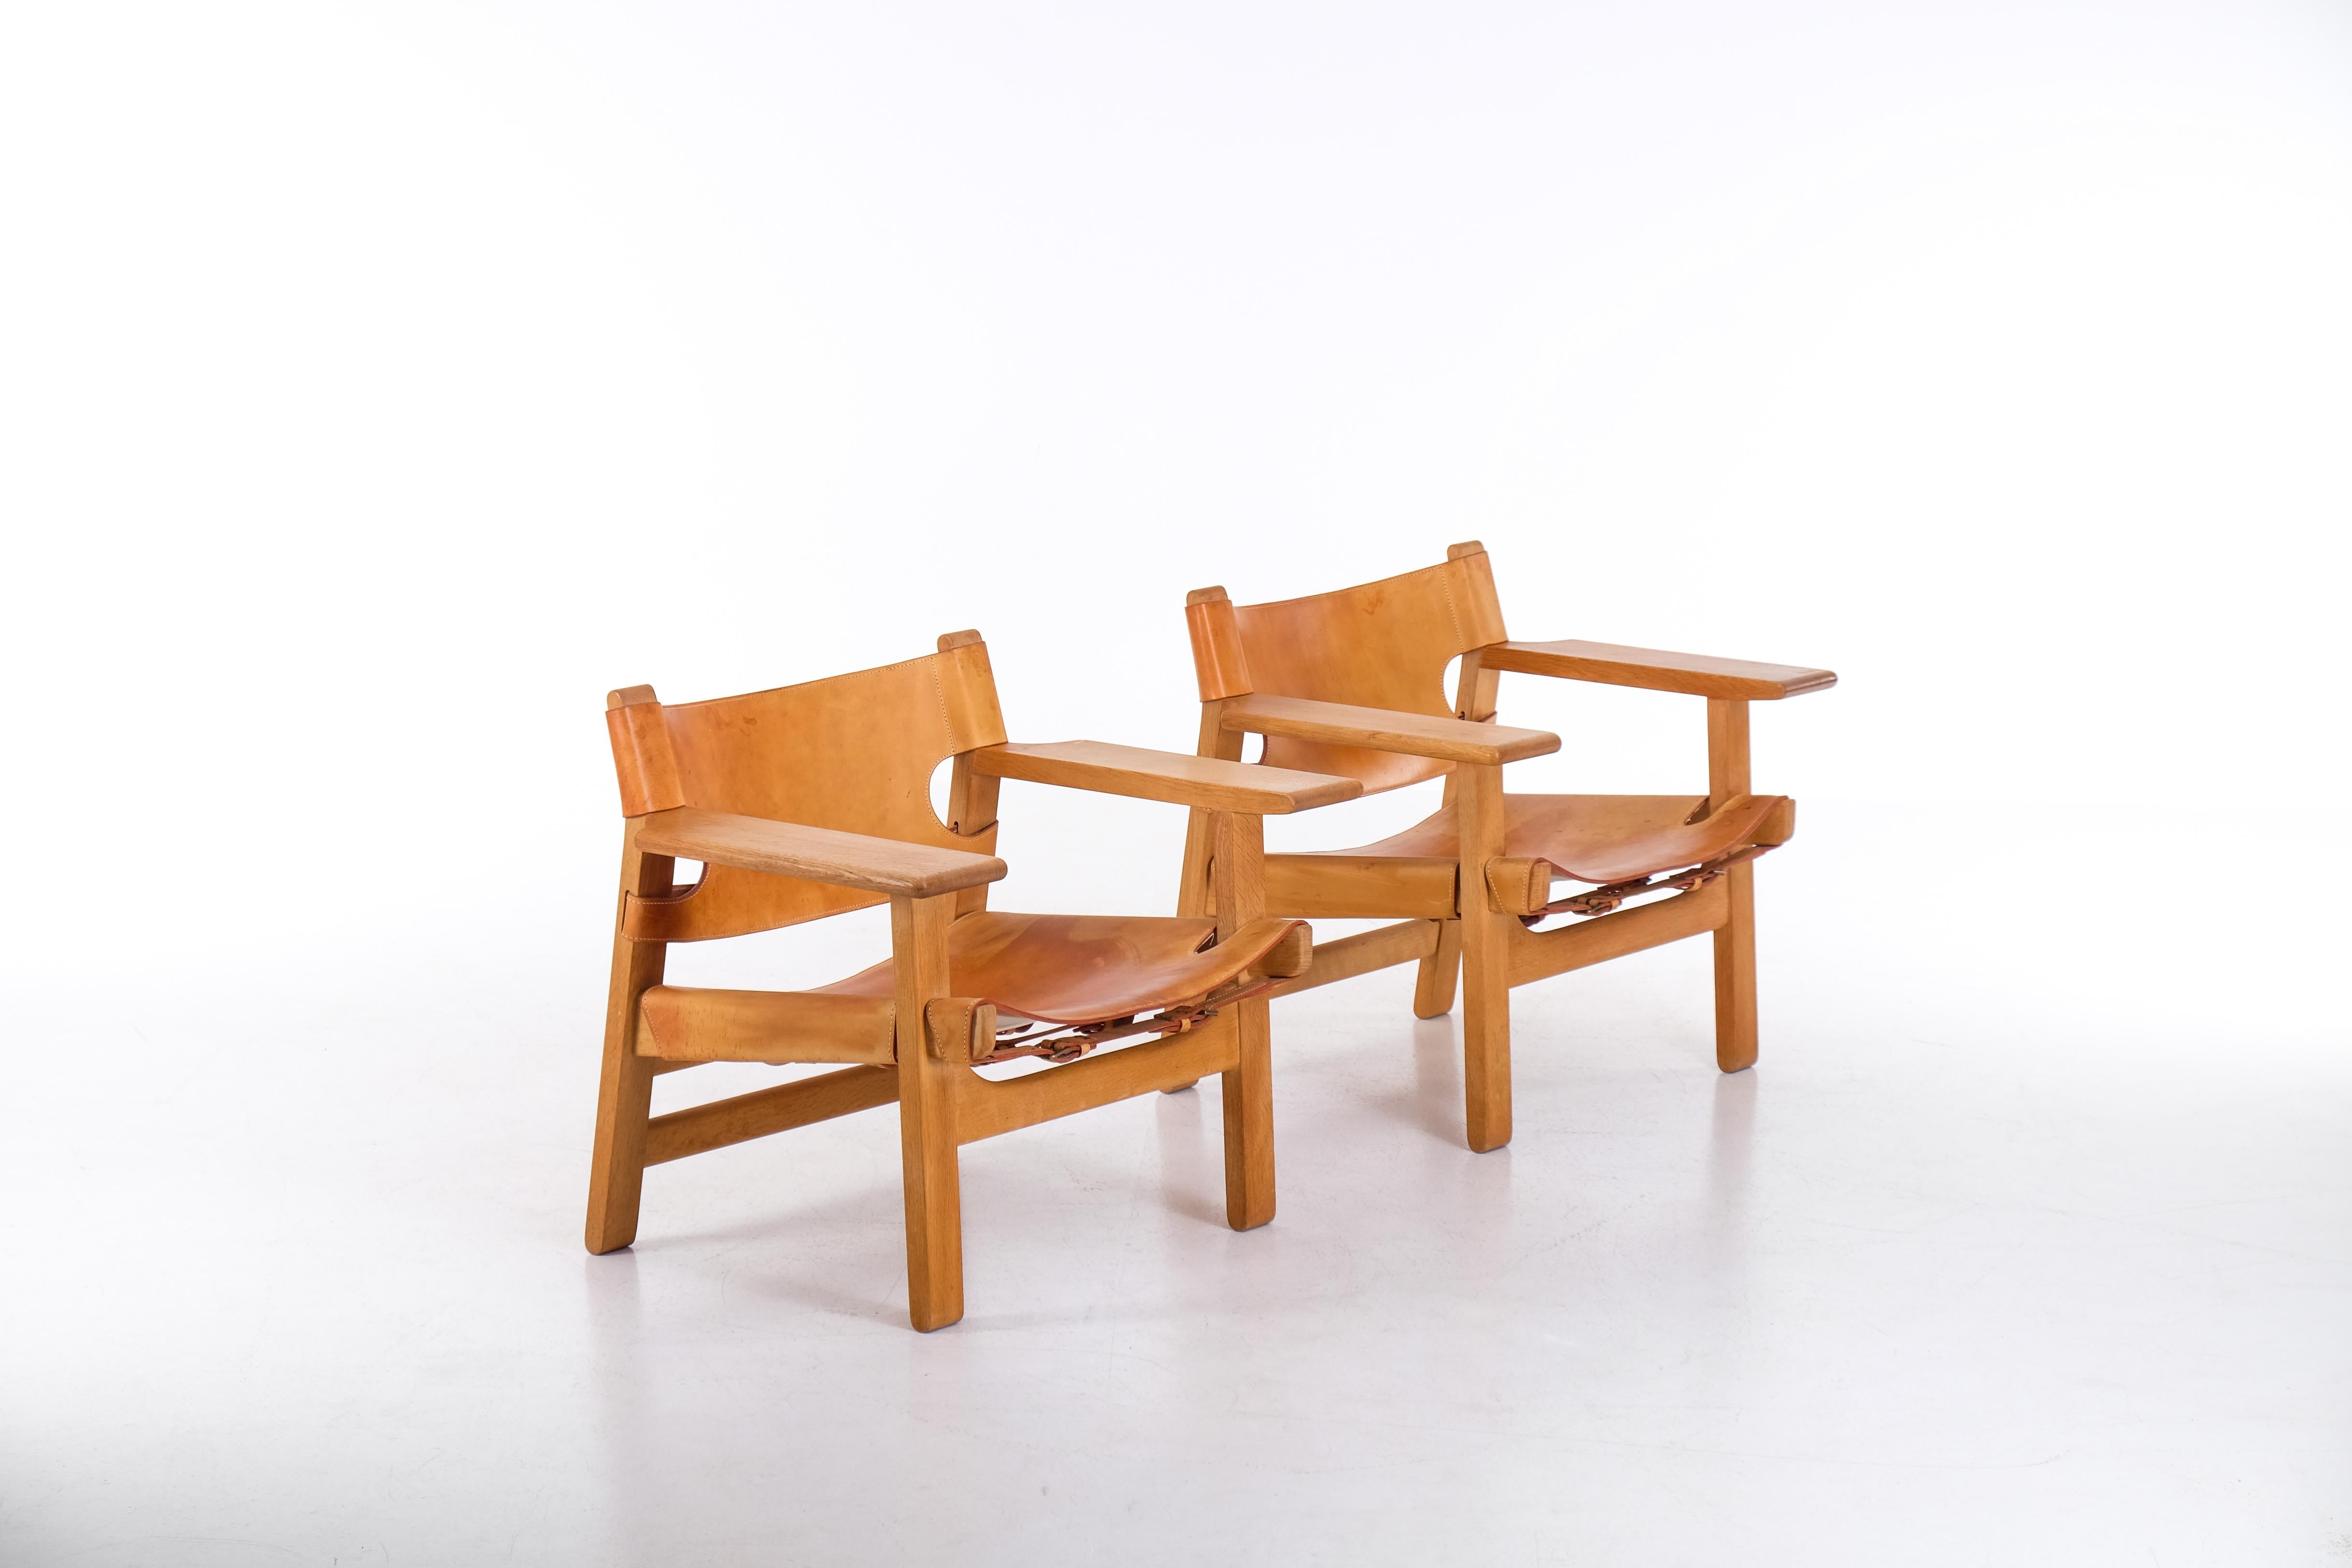 Pair of Spanish Chairs by Børge Mogensen, 1960s For Sale 3